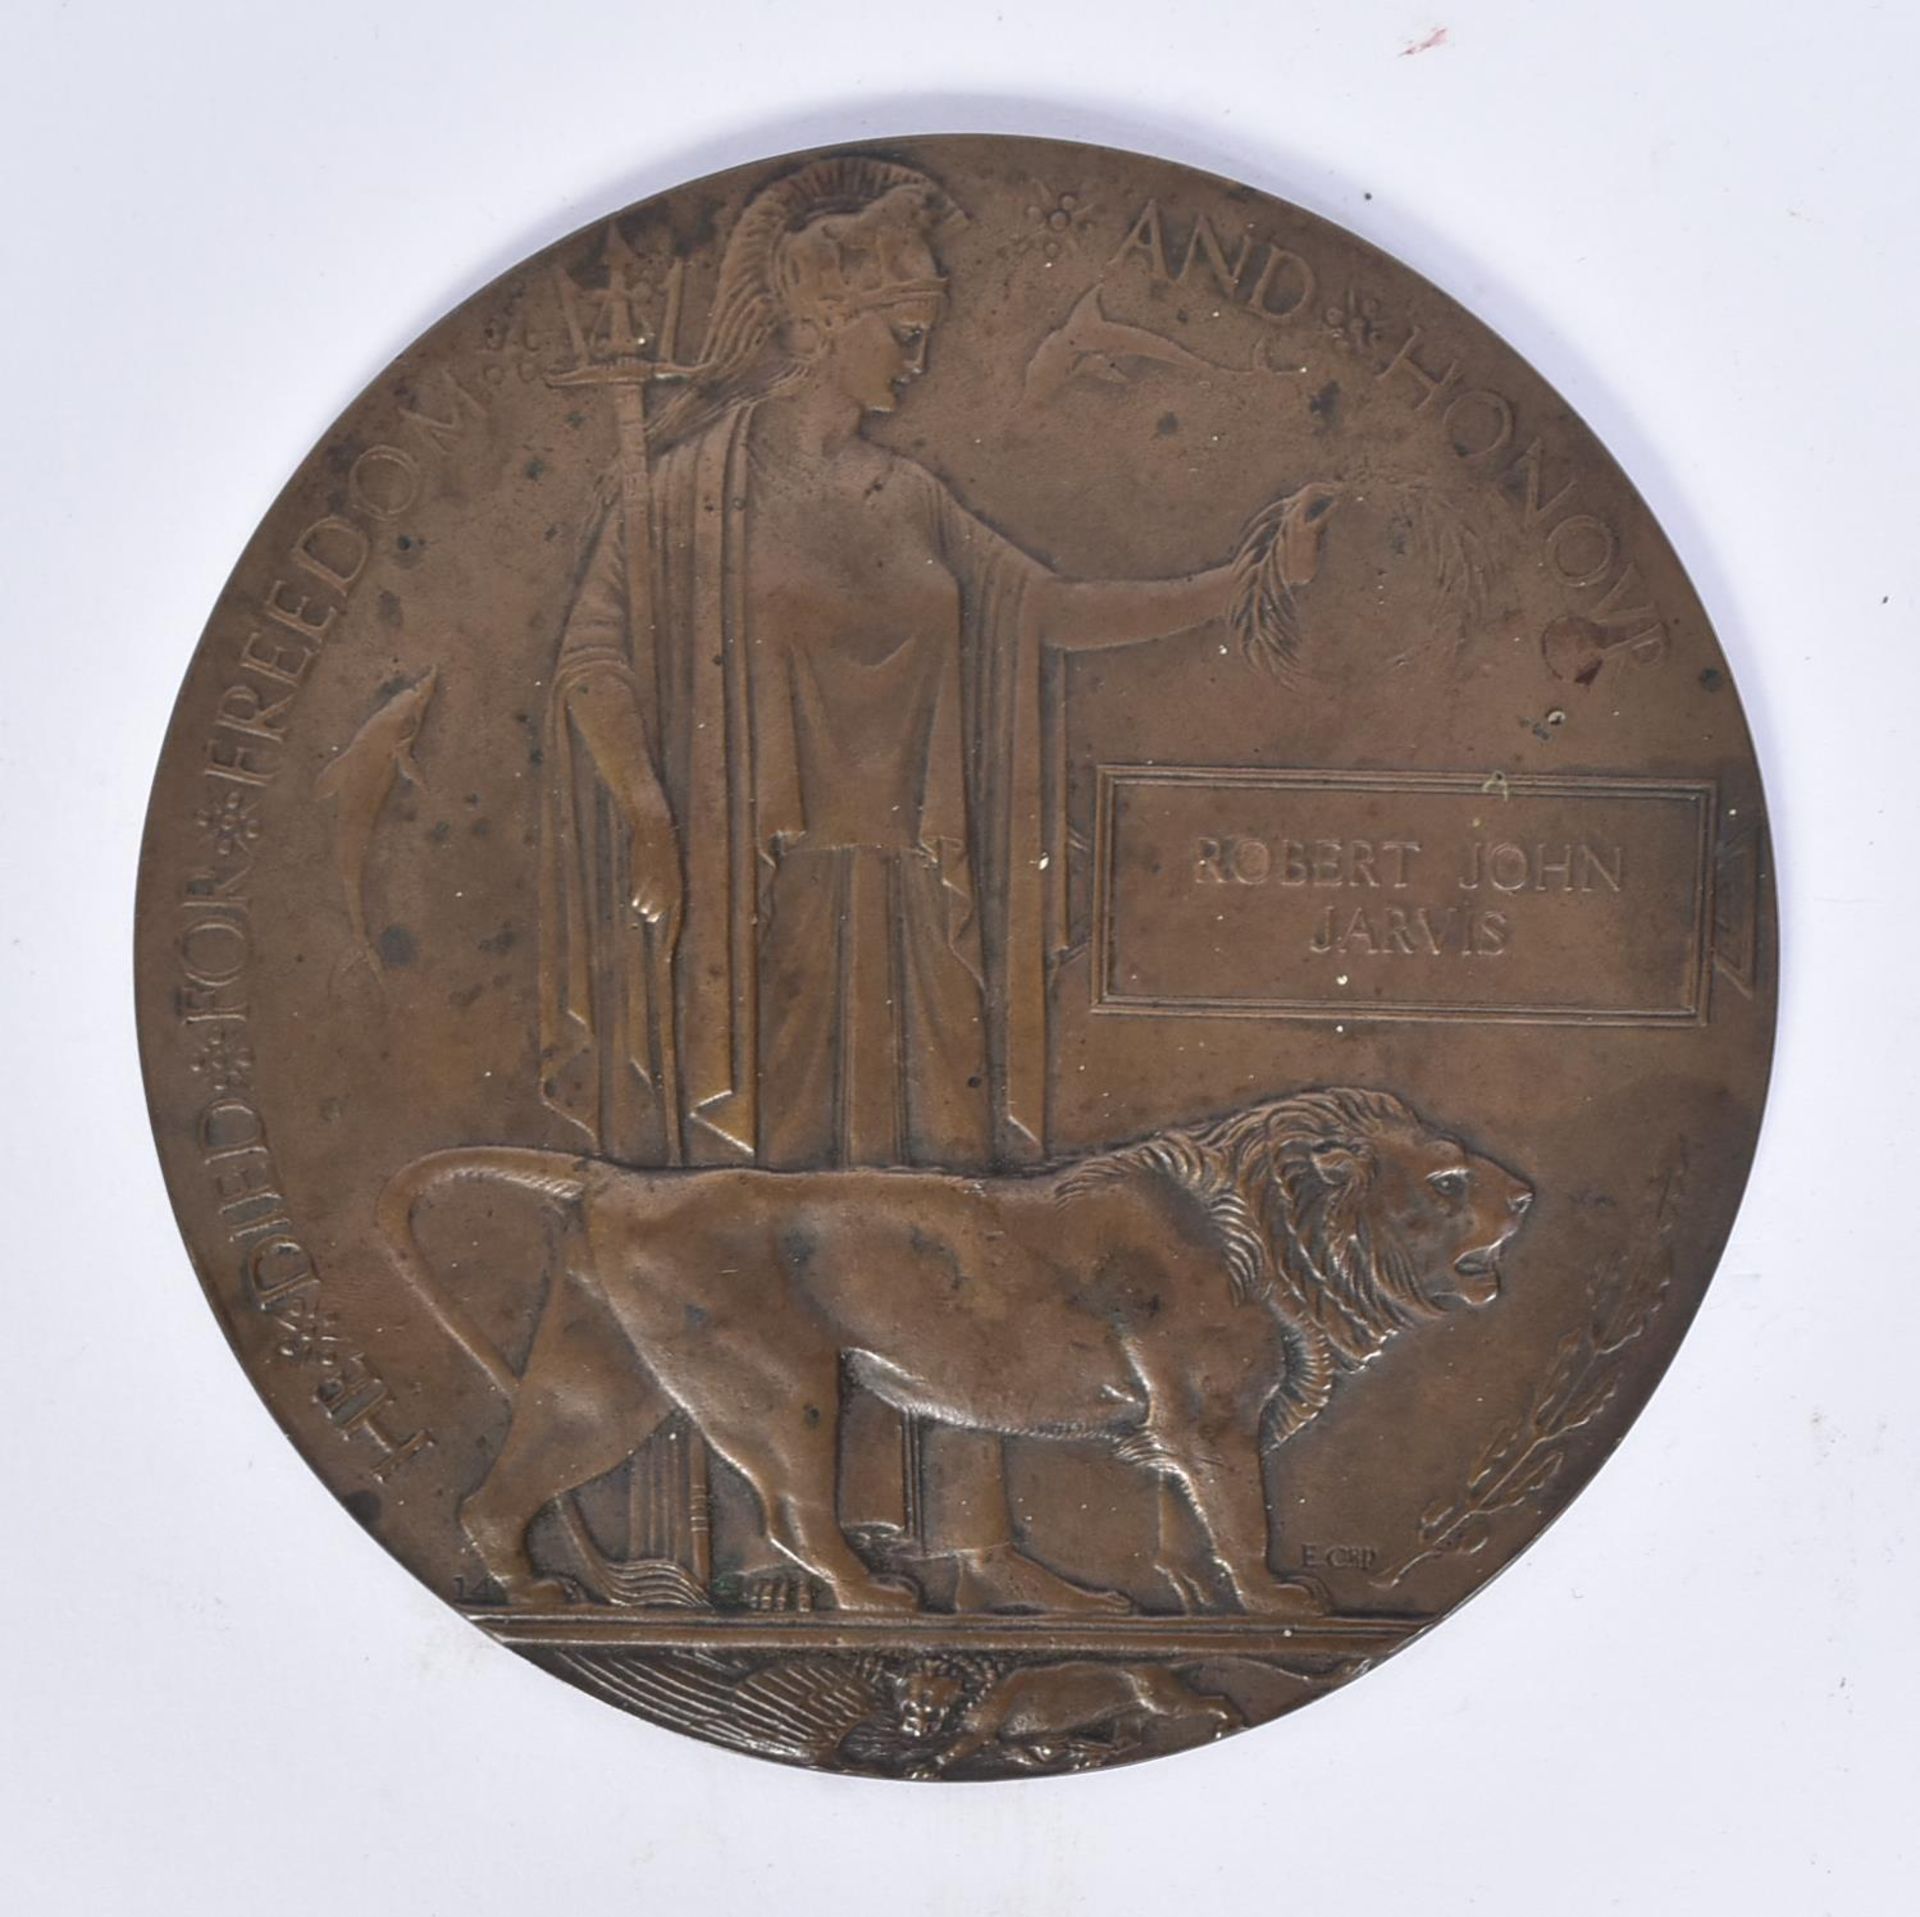 WWI FIRST WORLD WAR DEATH MEMORIAL PLAQUE MEDAL - Image 2 of 5